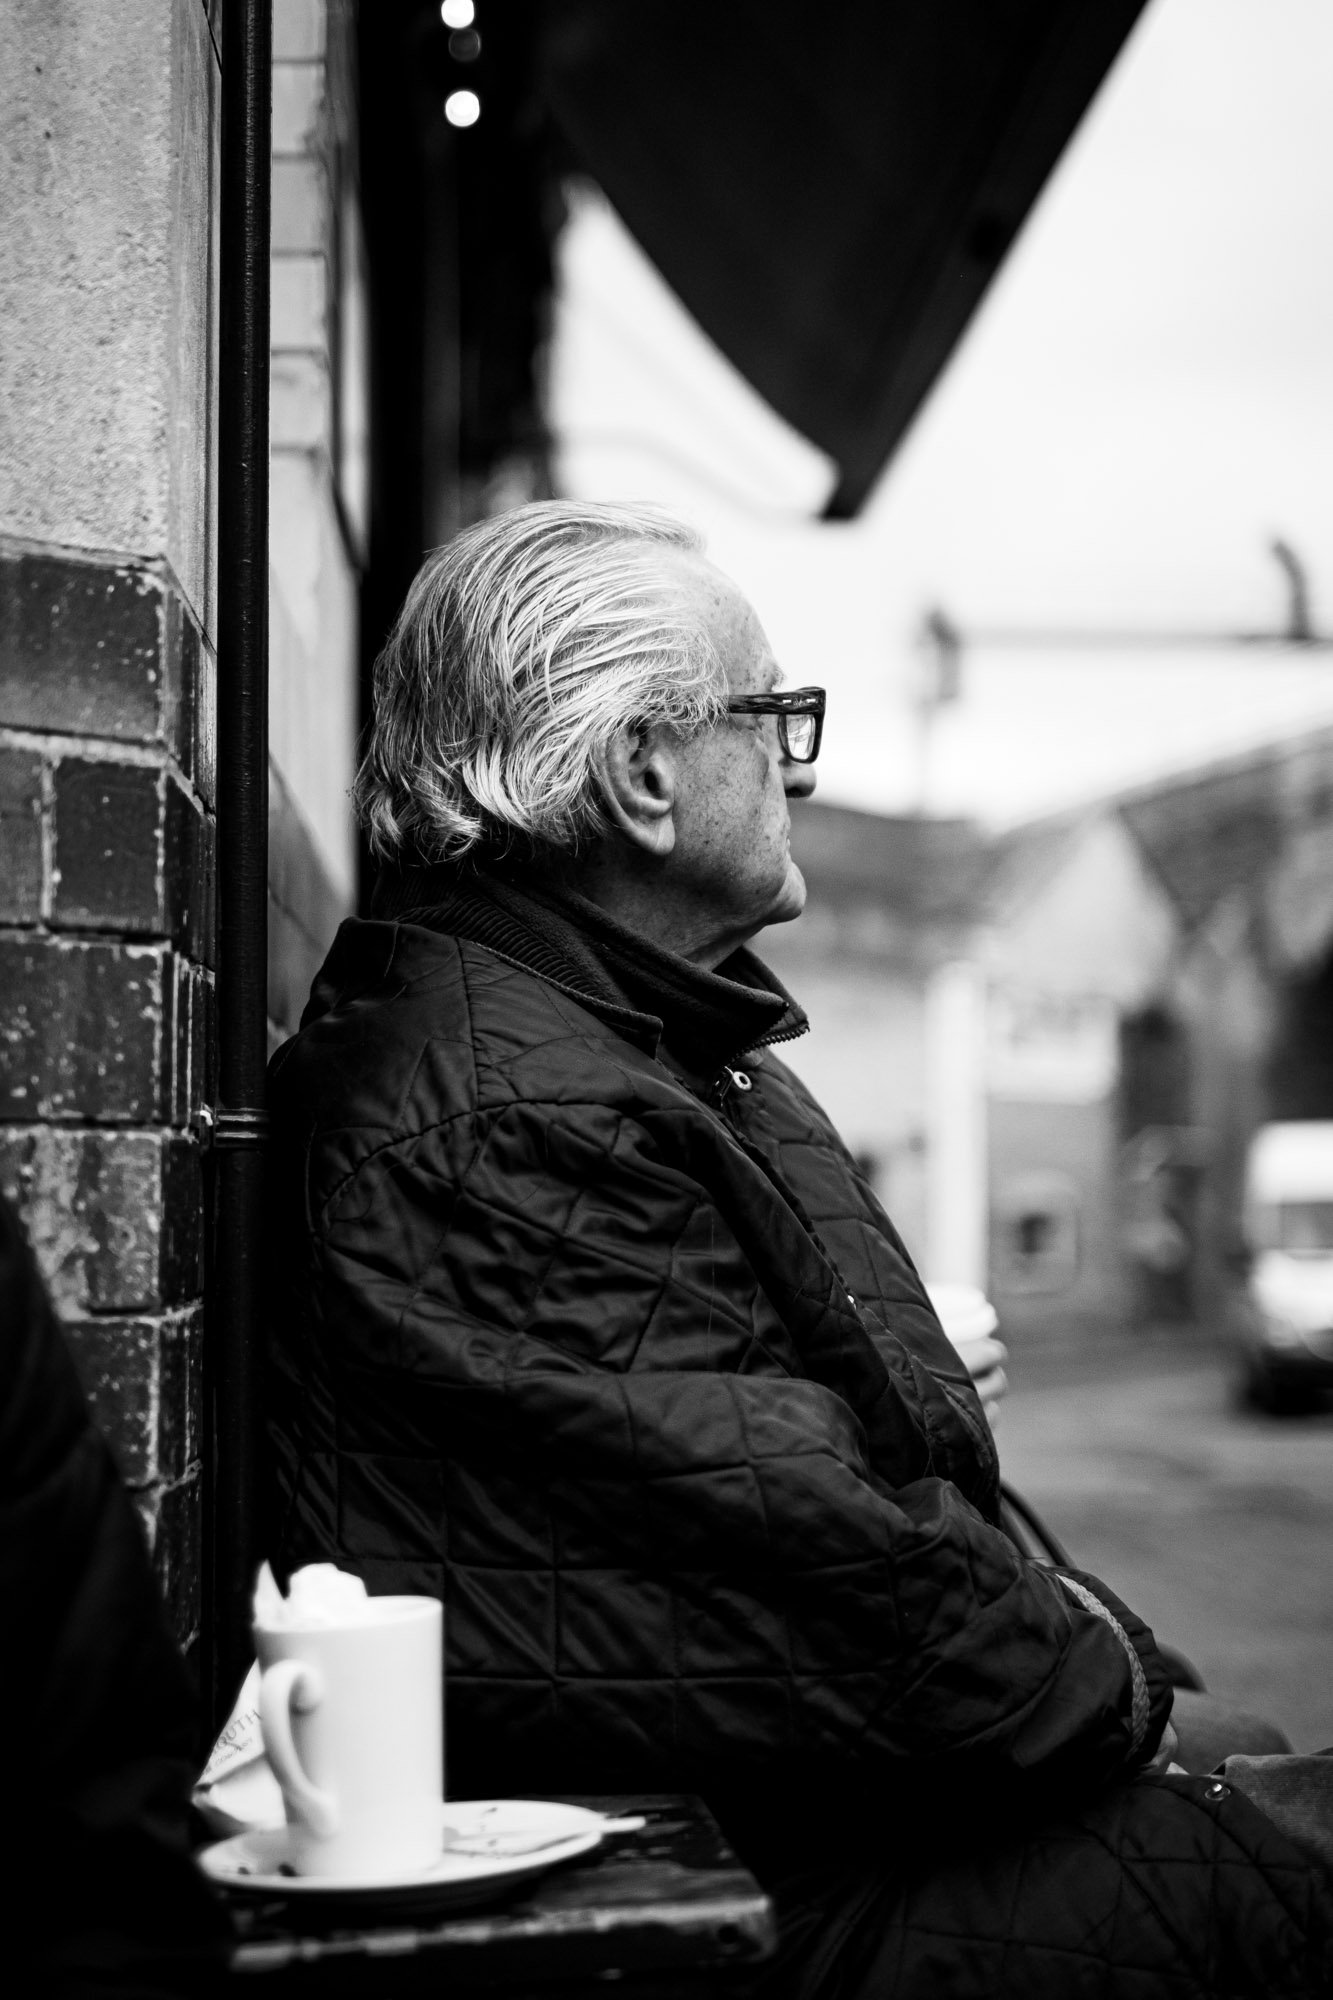 Street Photography - Black and White - Fujifilm - Andy Kirby - MrKirby Photography-07.jpg